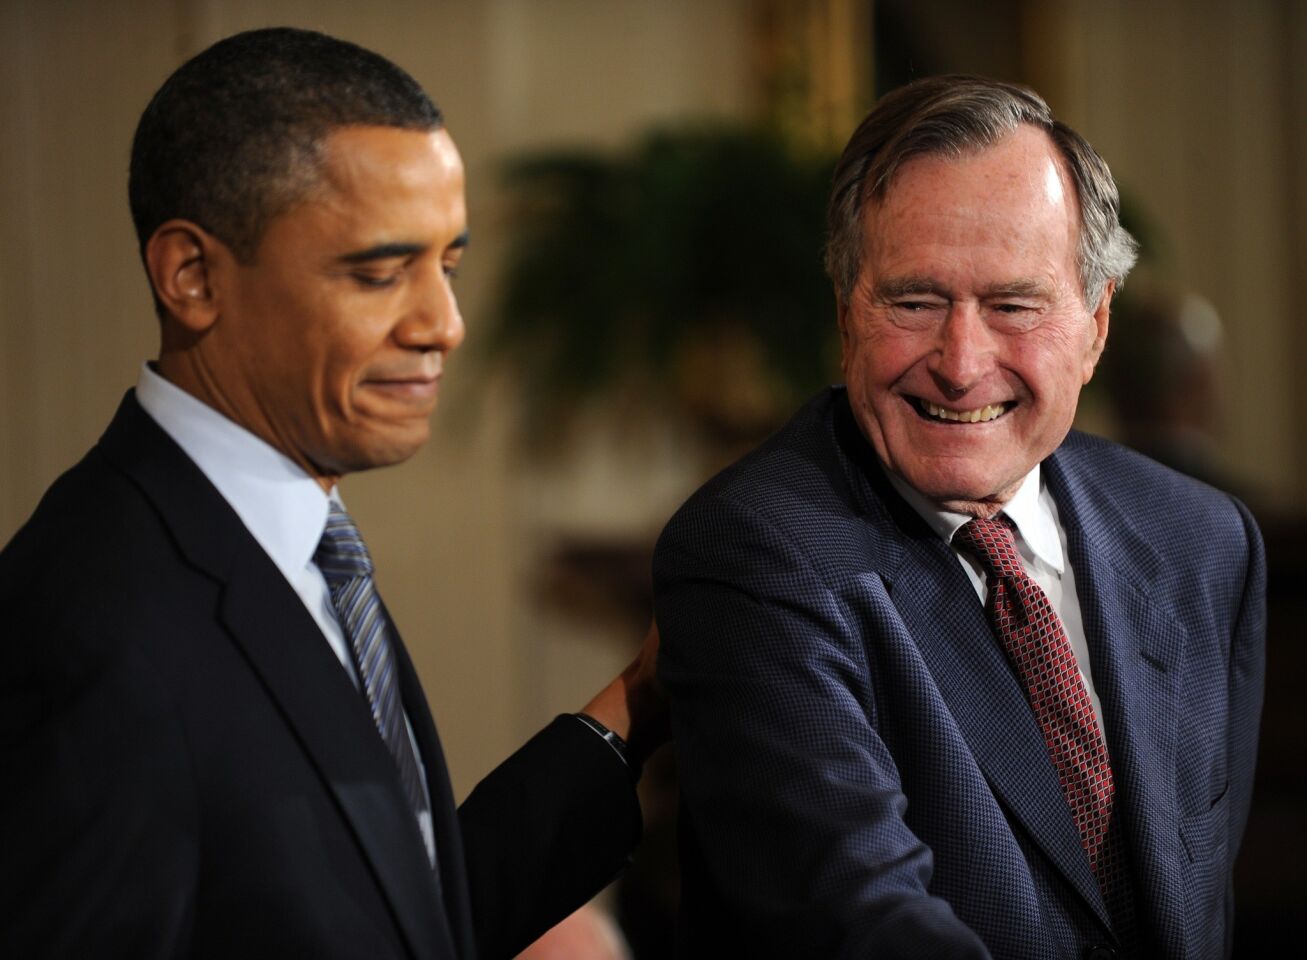 President Obama presents the Medal of Freedom to former President George H.W. Bush at the White House in 2011.